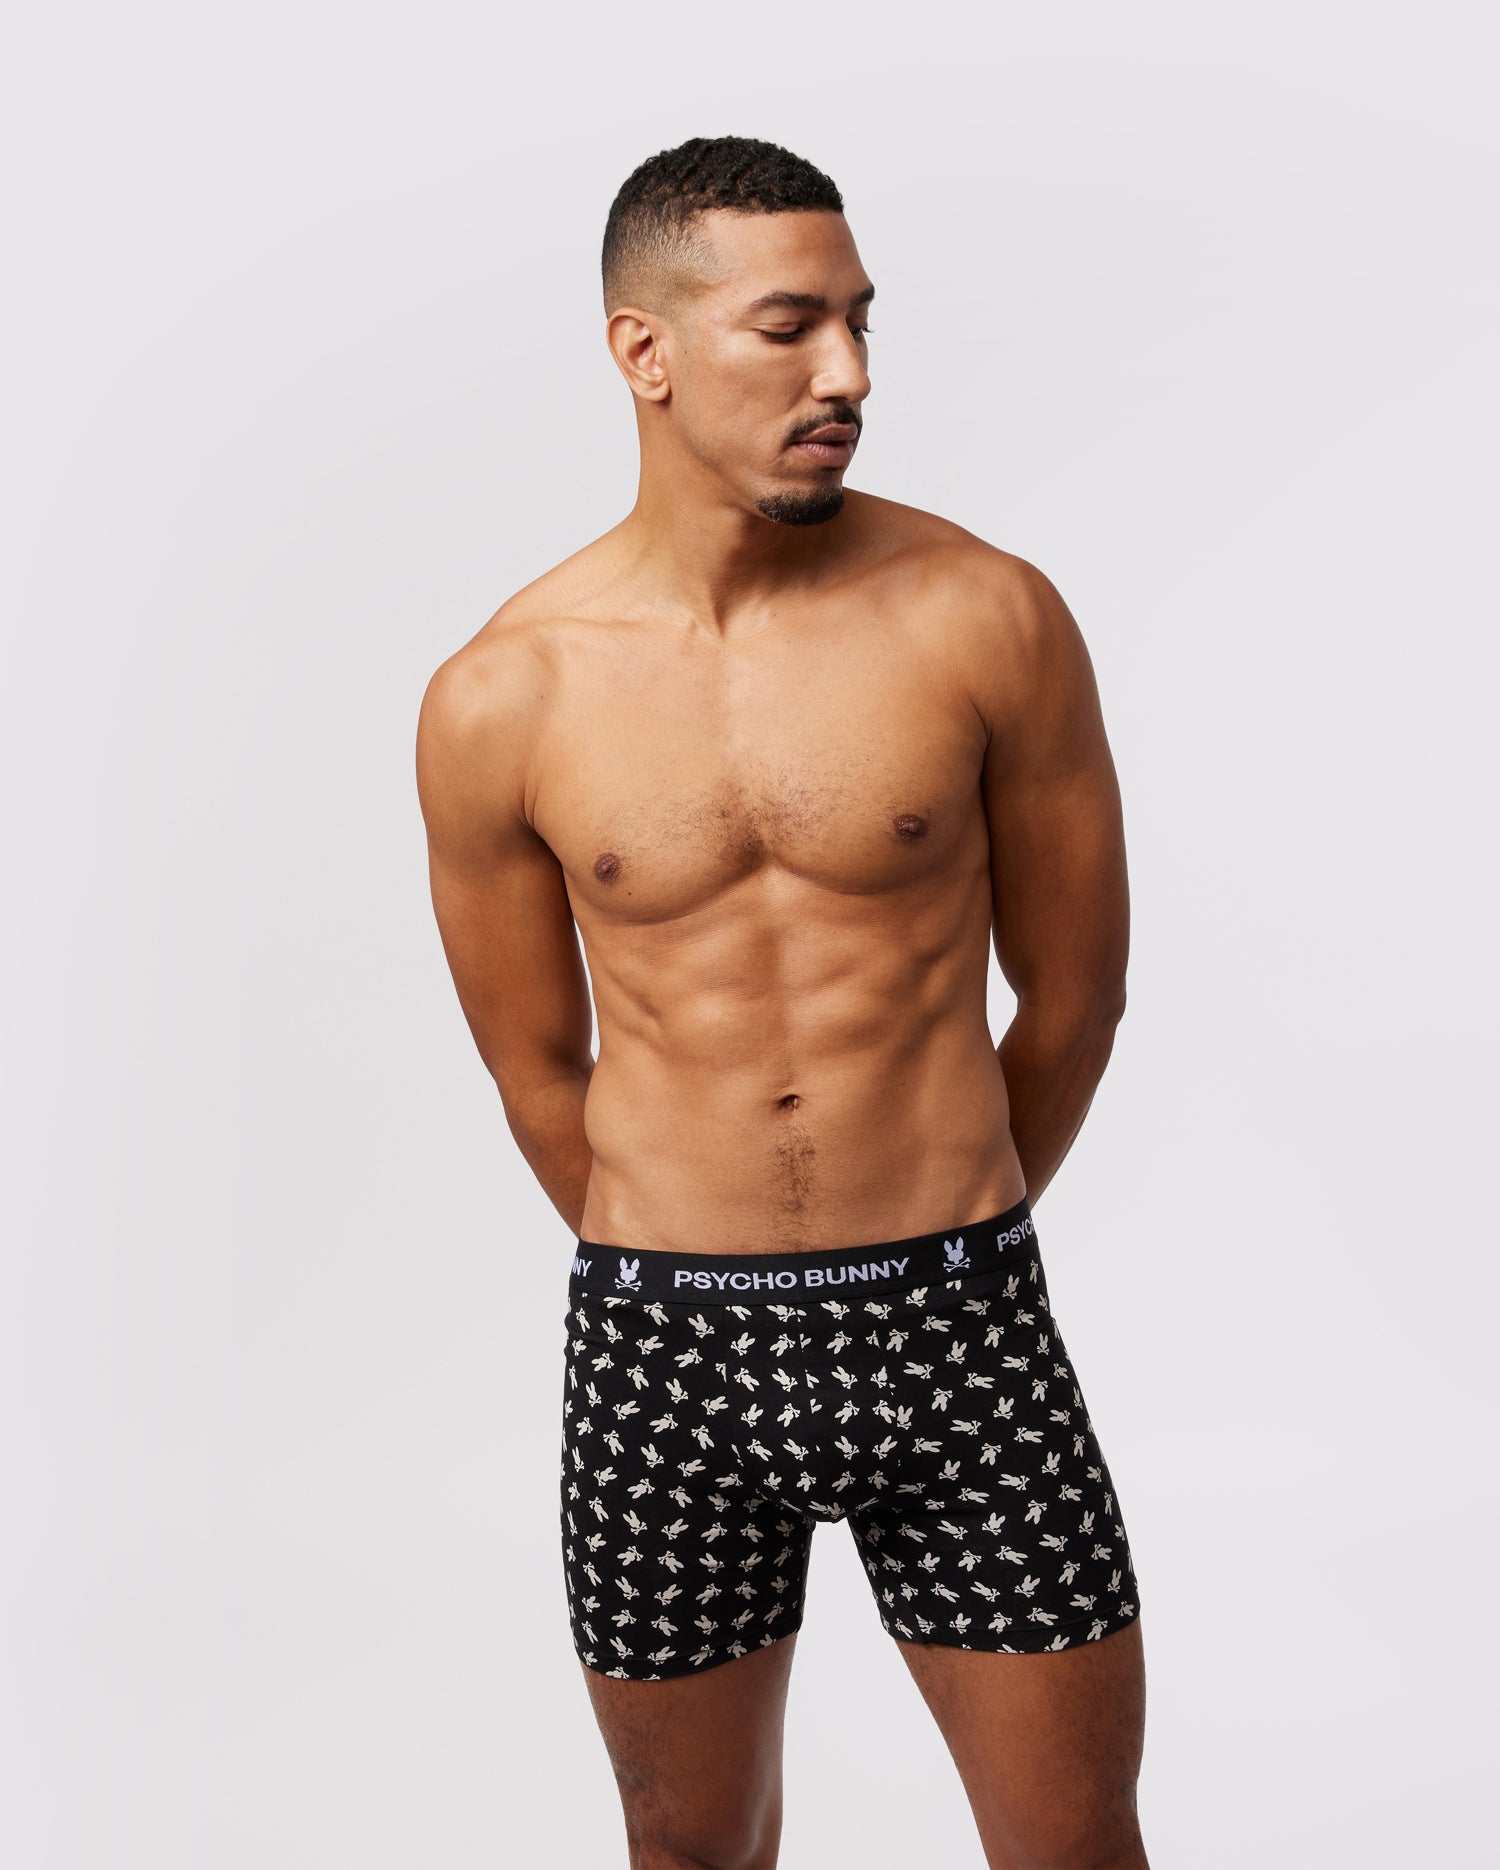 MENS NAVY SOLID KNIT 2 PACK BOXER BRIEF | PSYCHO BUNNY